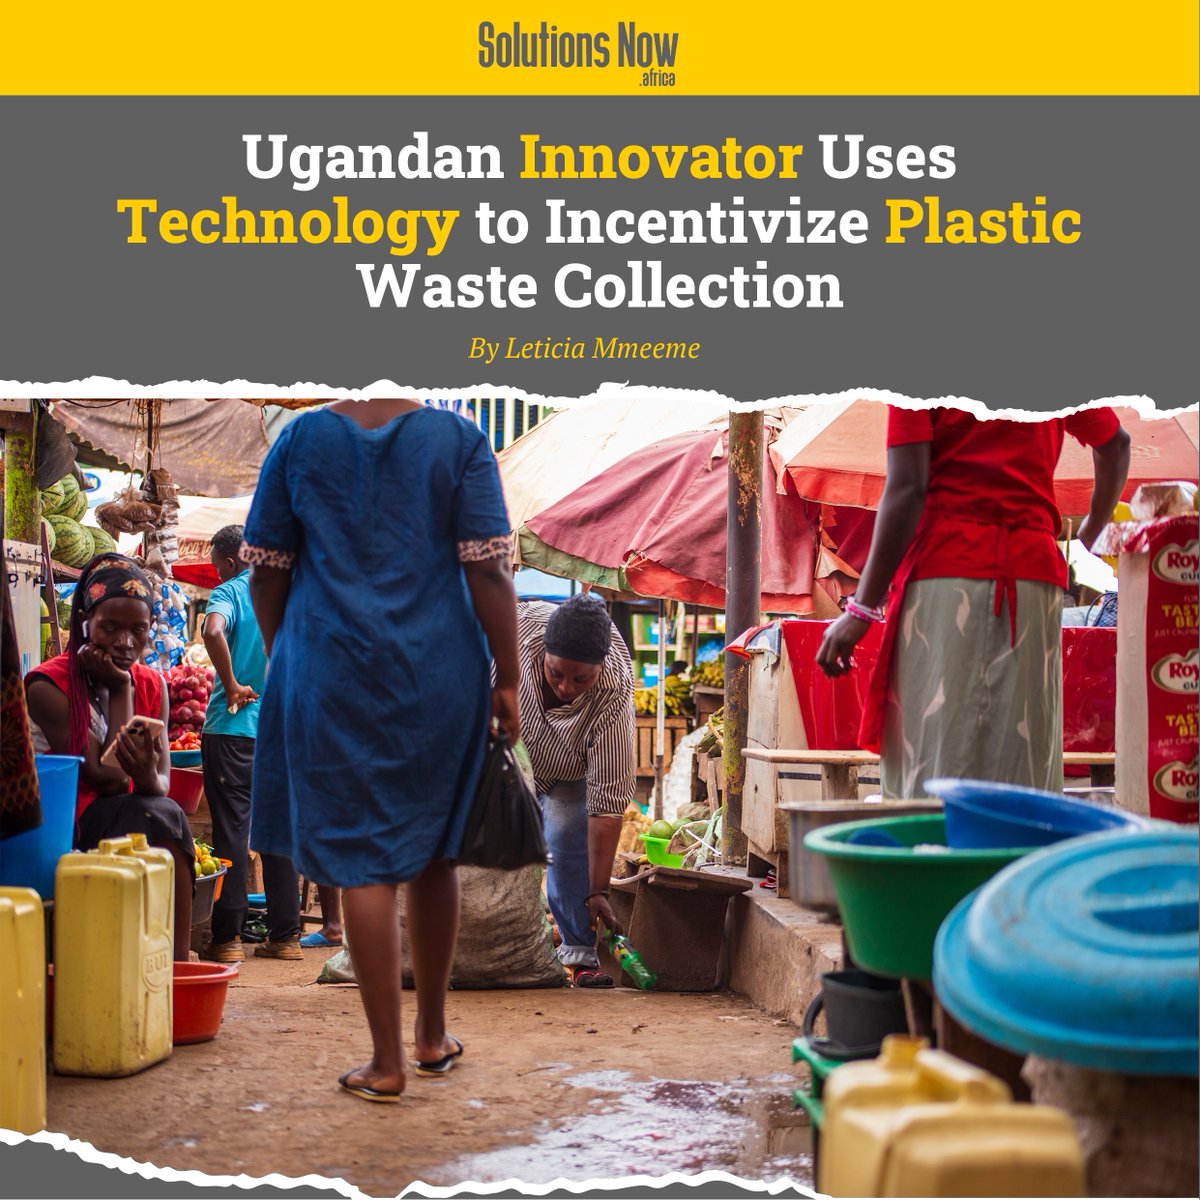 In Uganda, a digital environmental activist is leveraging technology to incentivize plastic waste collection. @MmeemeL writes about the details of this innovative model and its impact on community members. Read more: shorturl.at/Uz2wO (1/3)🧵 #Sojo #SolutionsJournalism